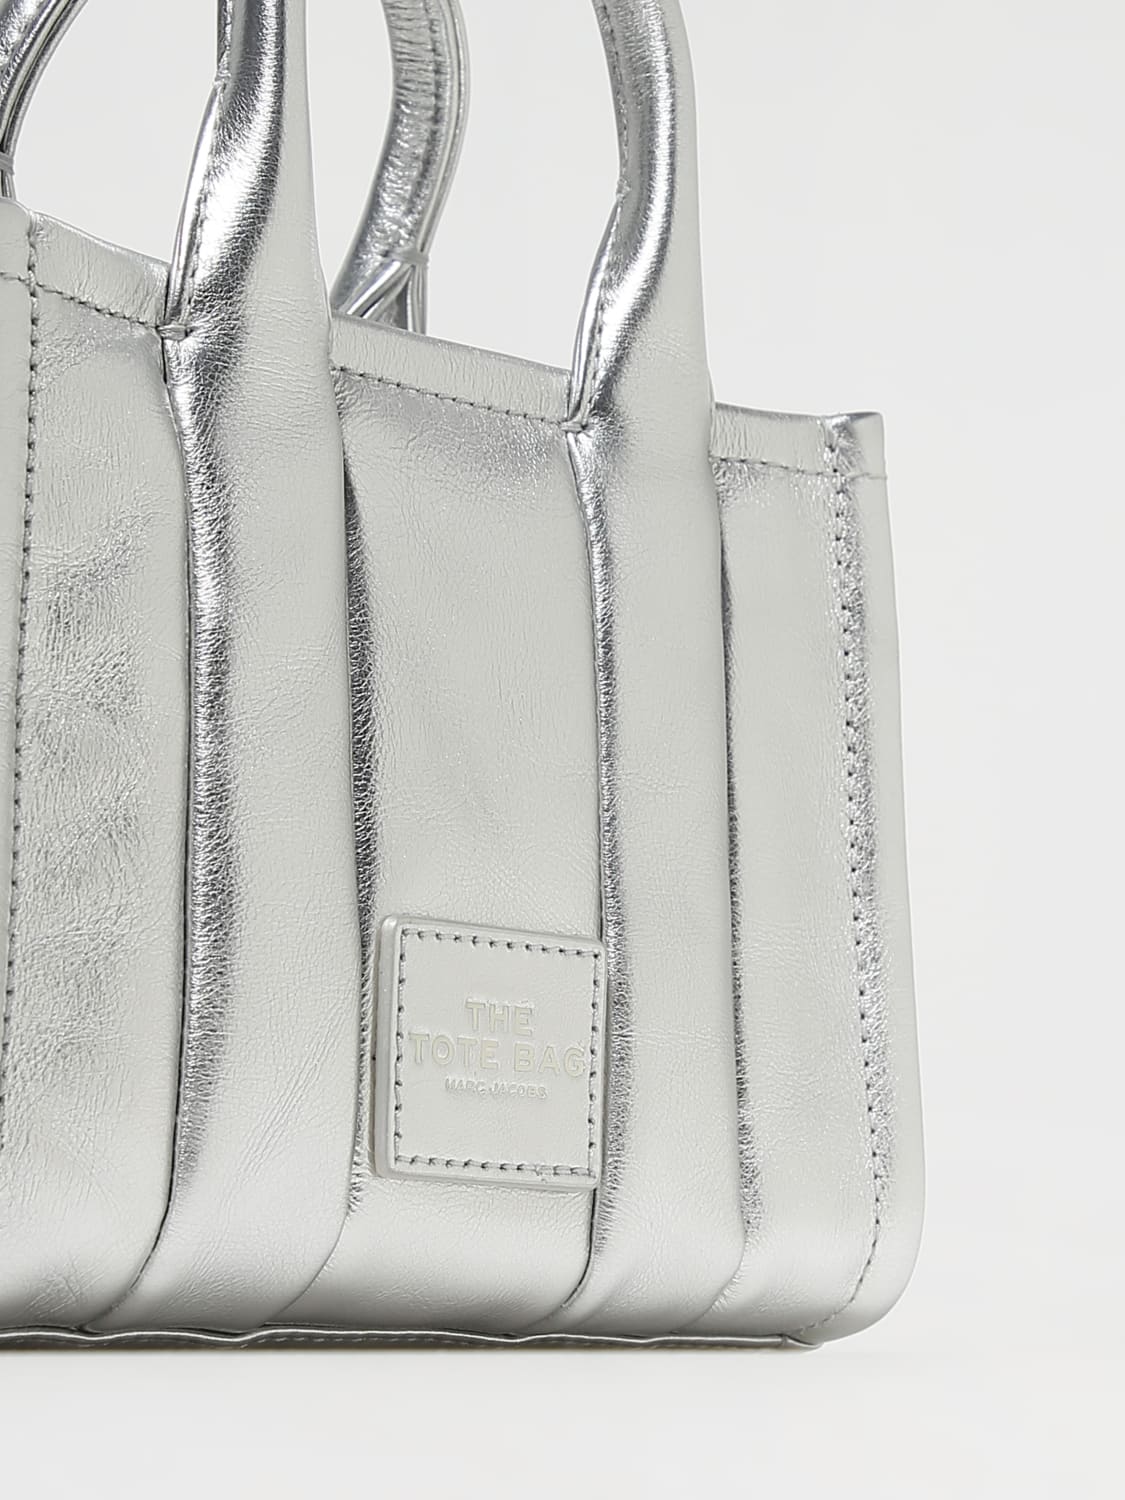 MARC JACOBS: mini bag for woman - Silver  Marc Jacobs mini bag  2F3HCR056H01 online at